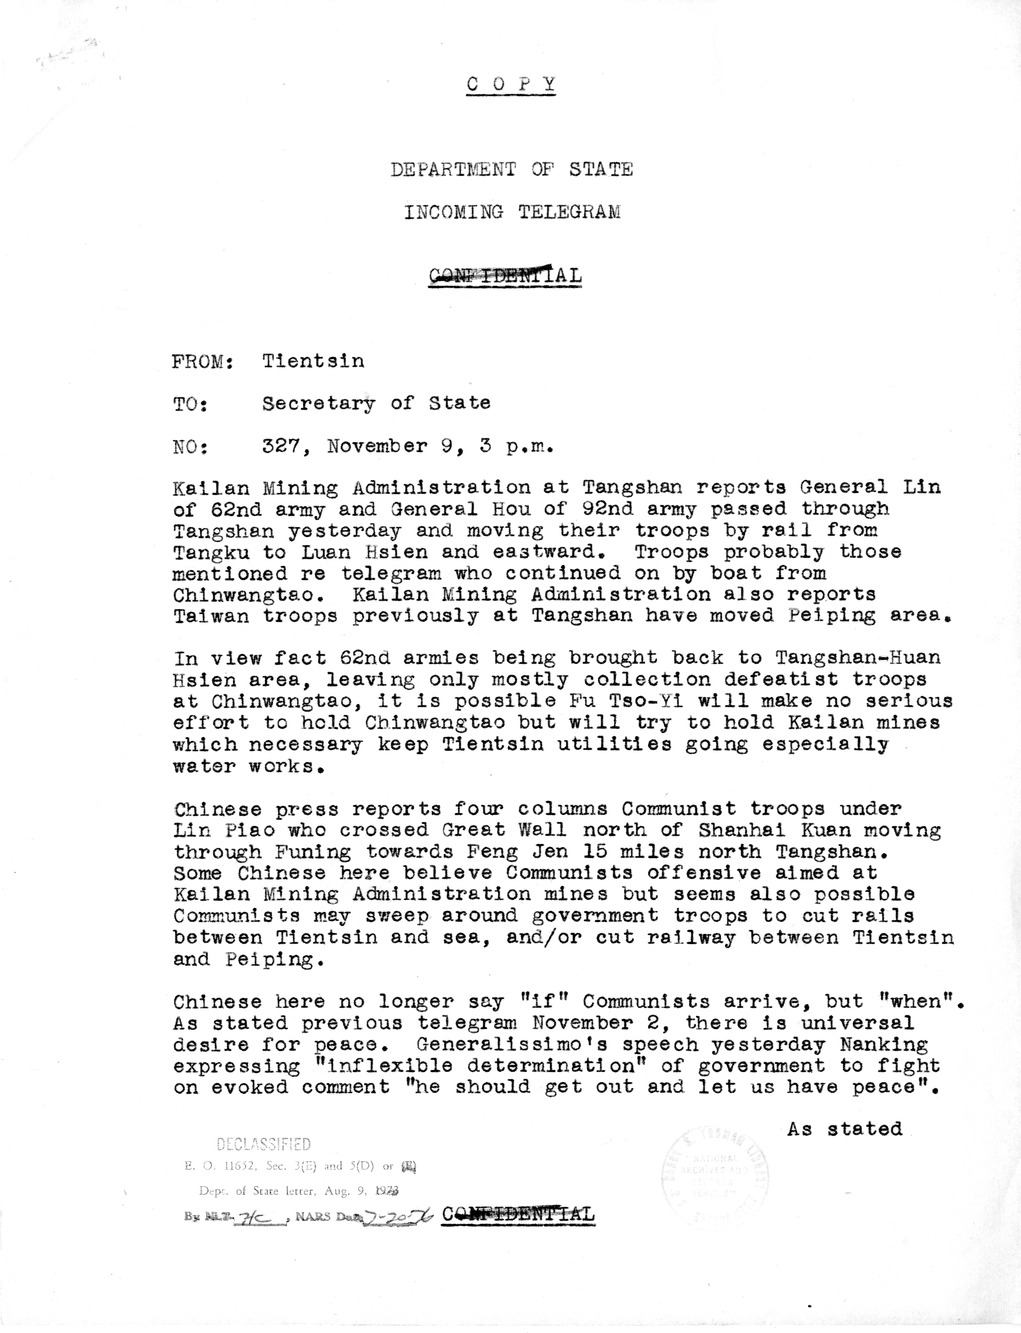 Memorandum from Walton Butterworth for the White House Signal Center, with Attachements